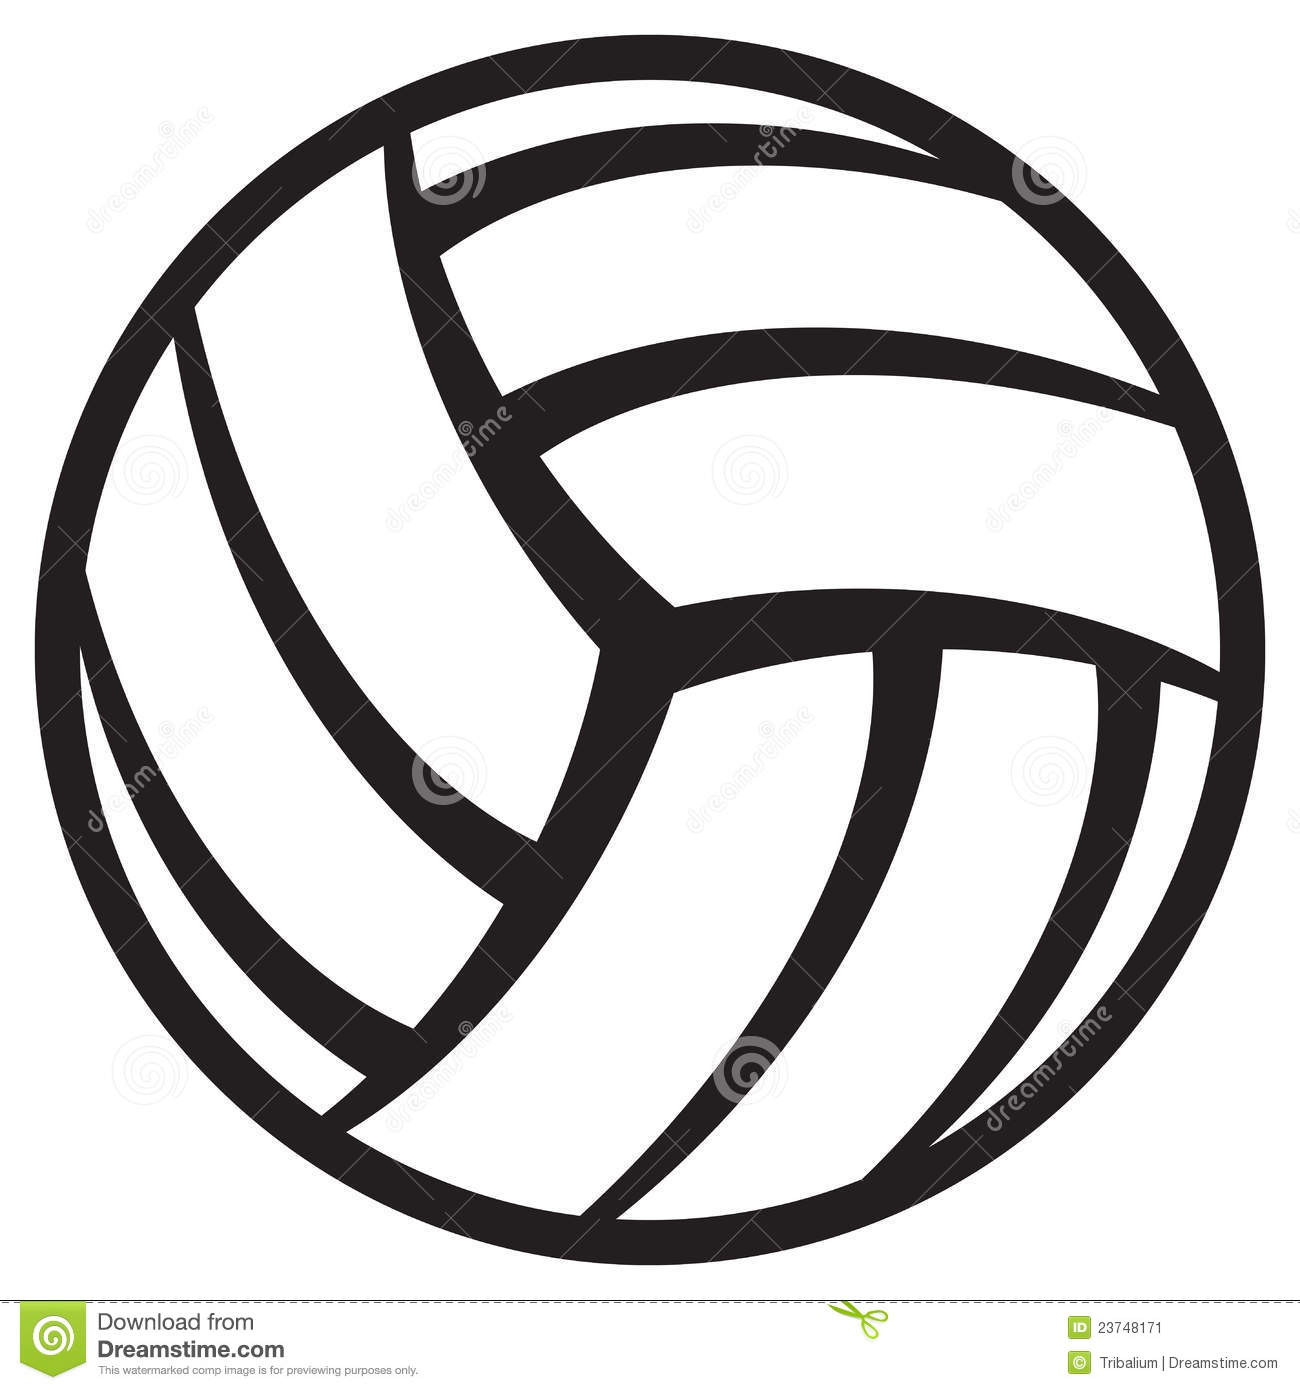 volleyball heart clipart - photo #8